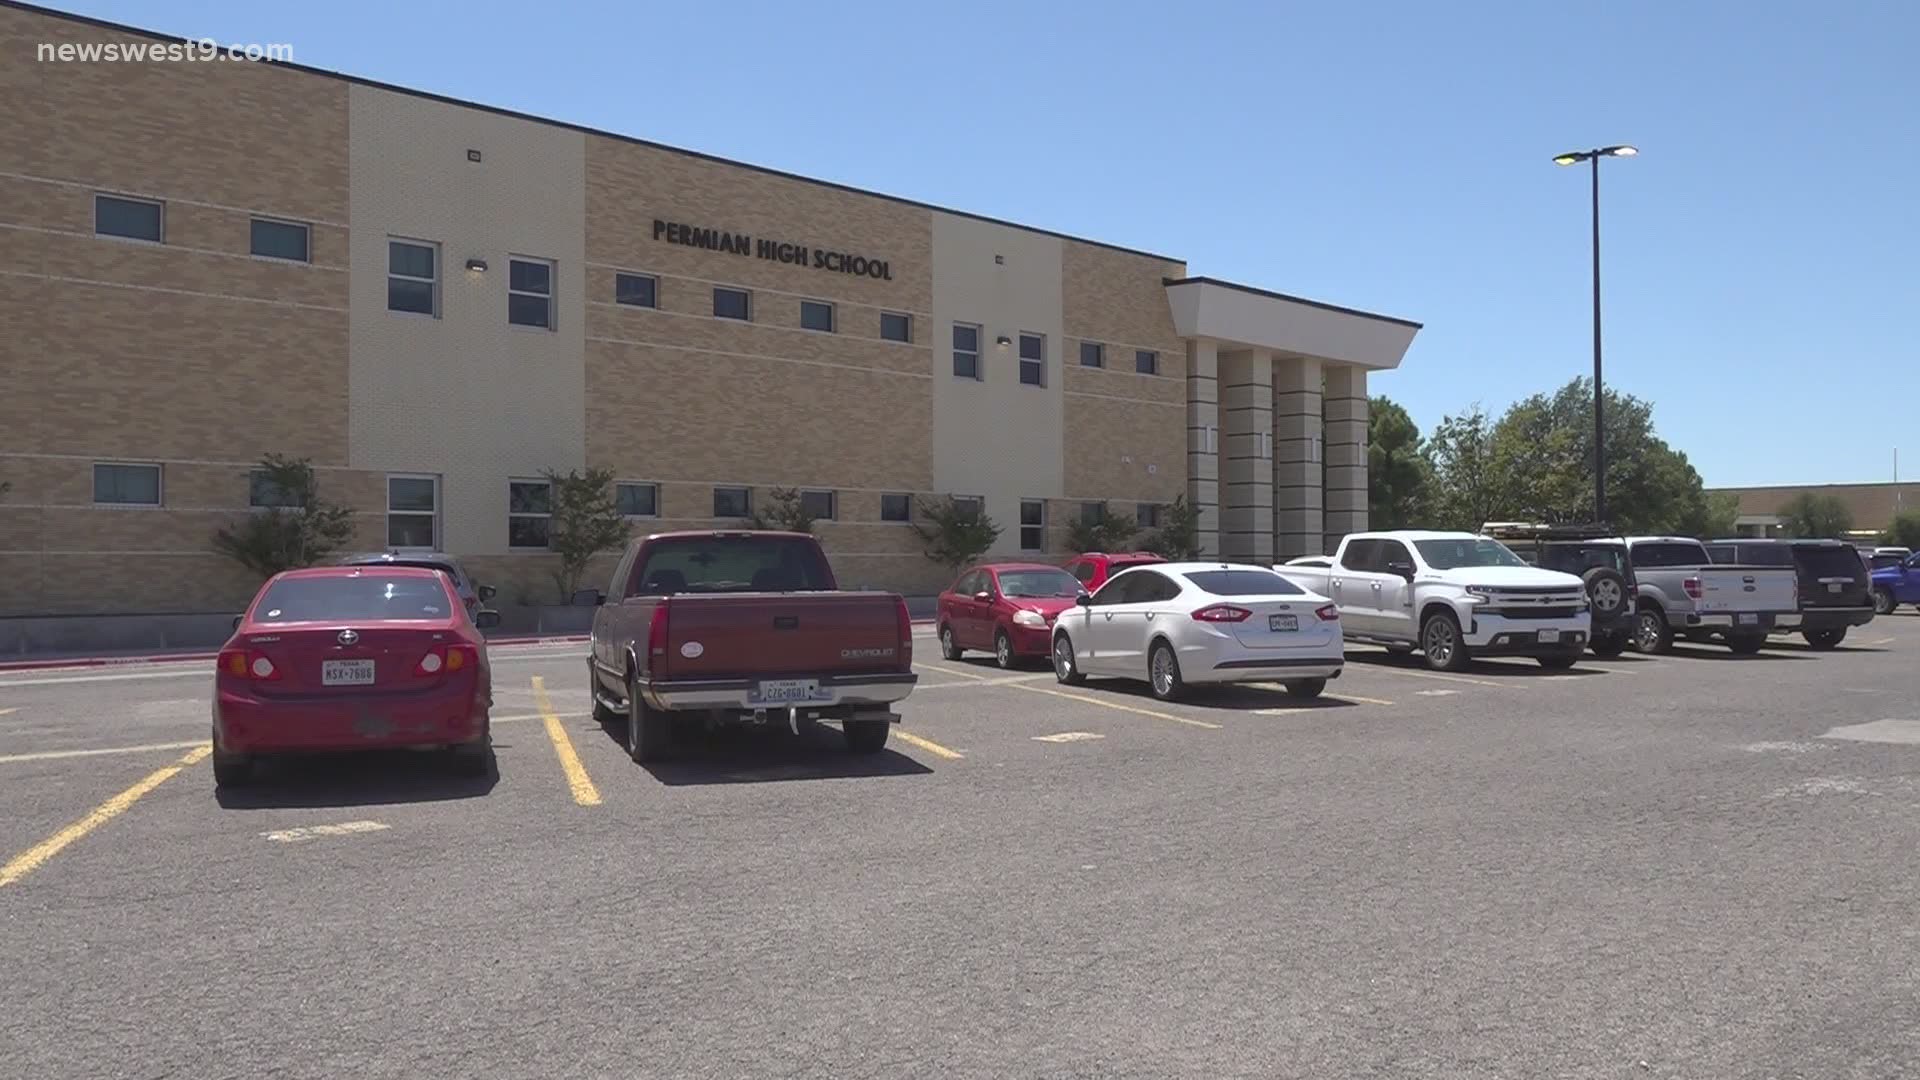 ECISD is faced with a unique re-opening plan for the start of the 2020-2021 school year as the majority of students will begin the year learning online.